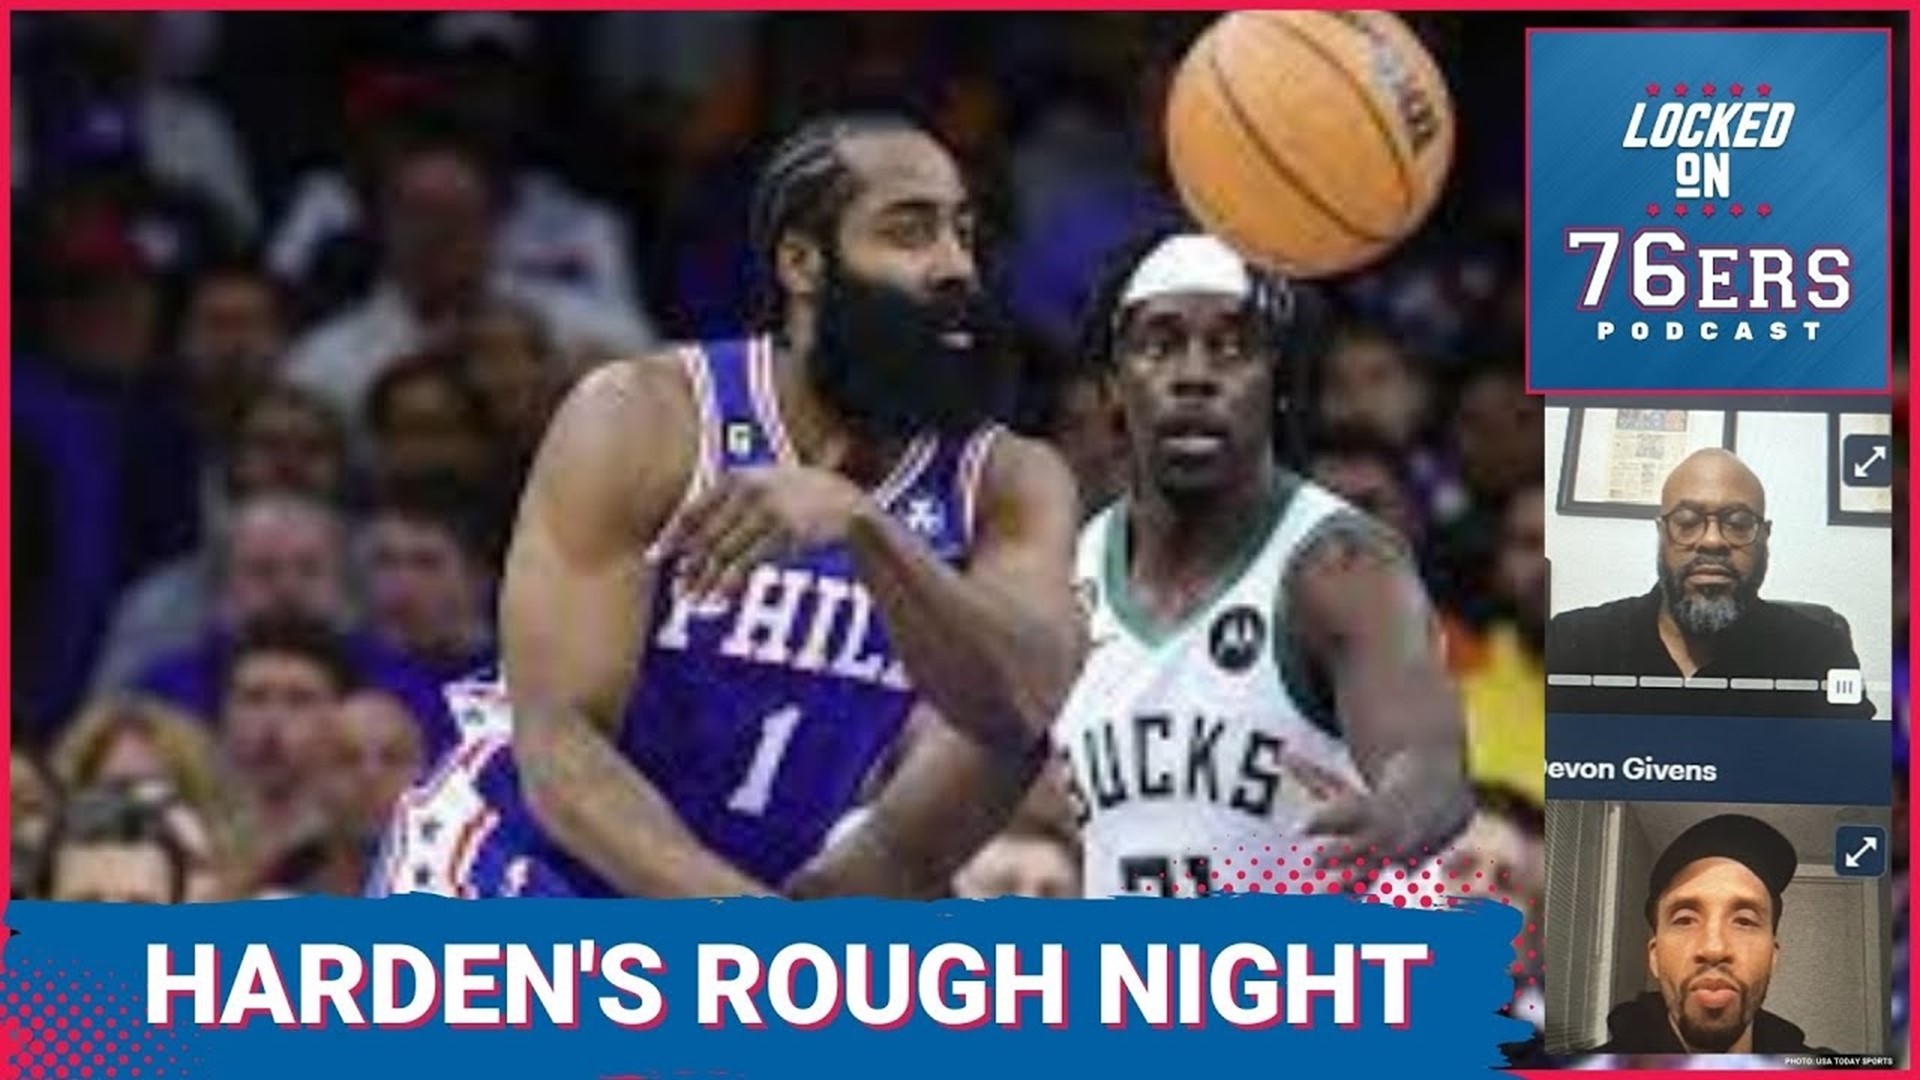 James Harden struggled mightily in the 76ers' loss to the Milwaukee Bucks. Devon Givens and Keith Pompey dissect his performance and the loss.